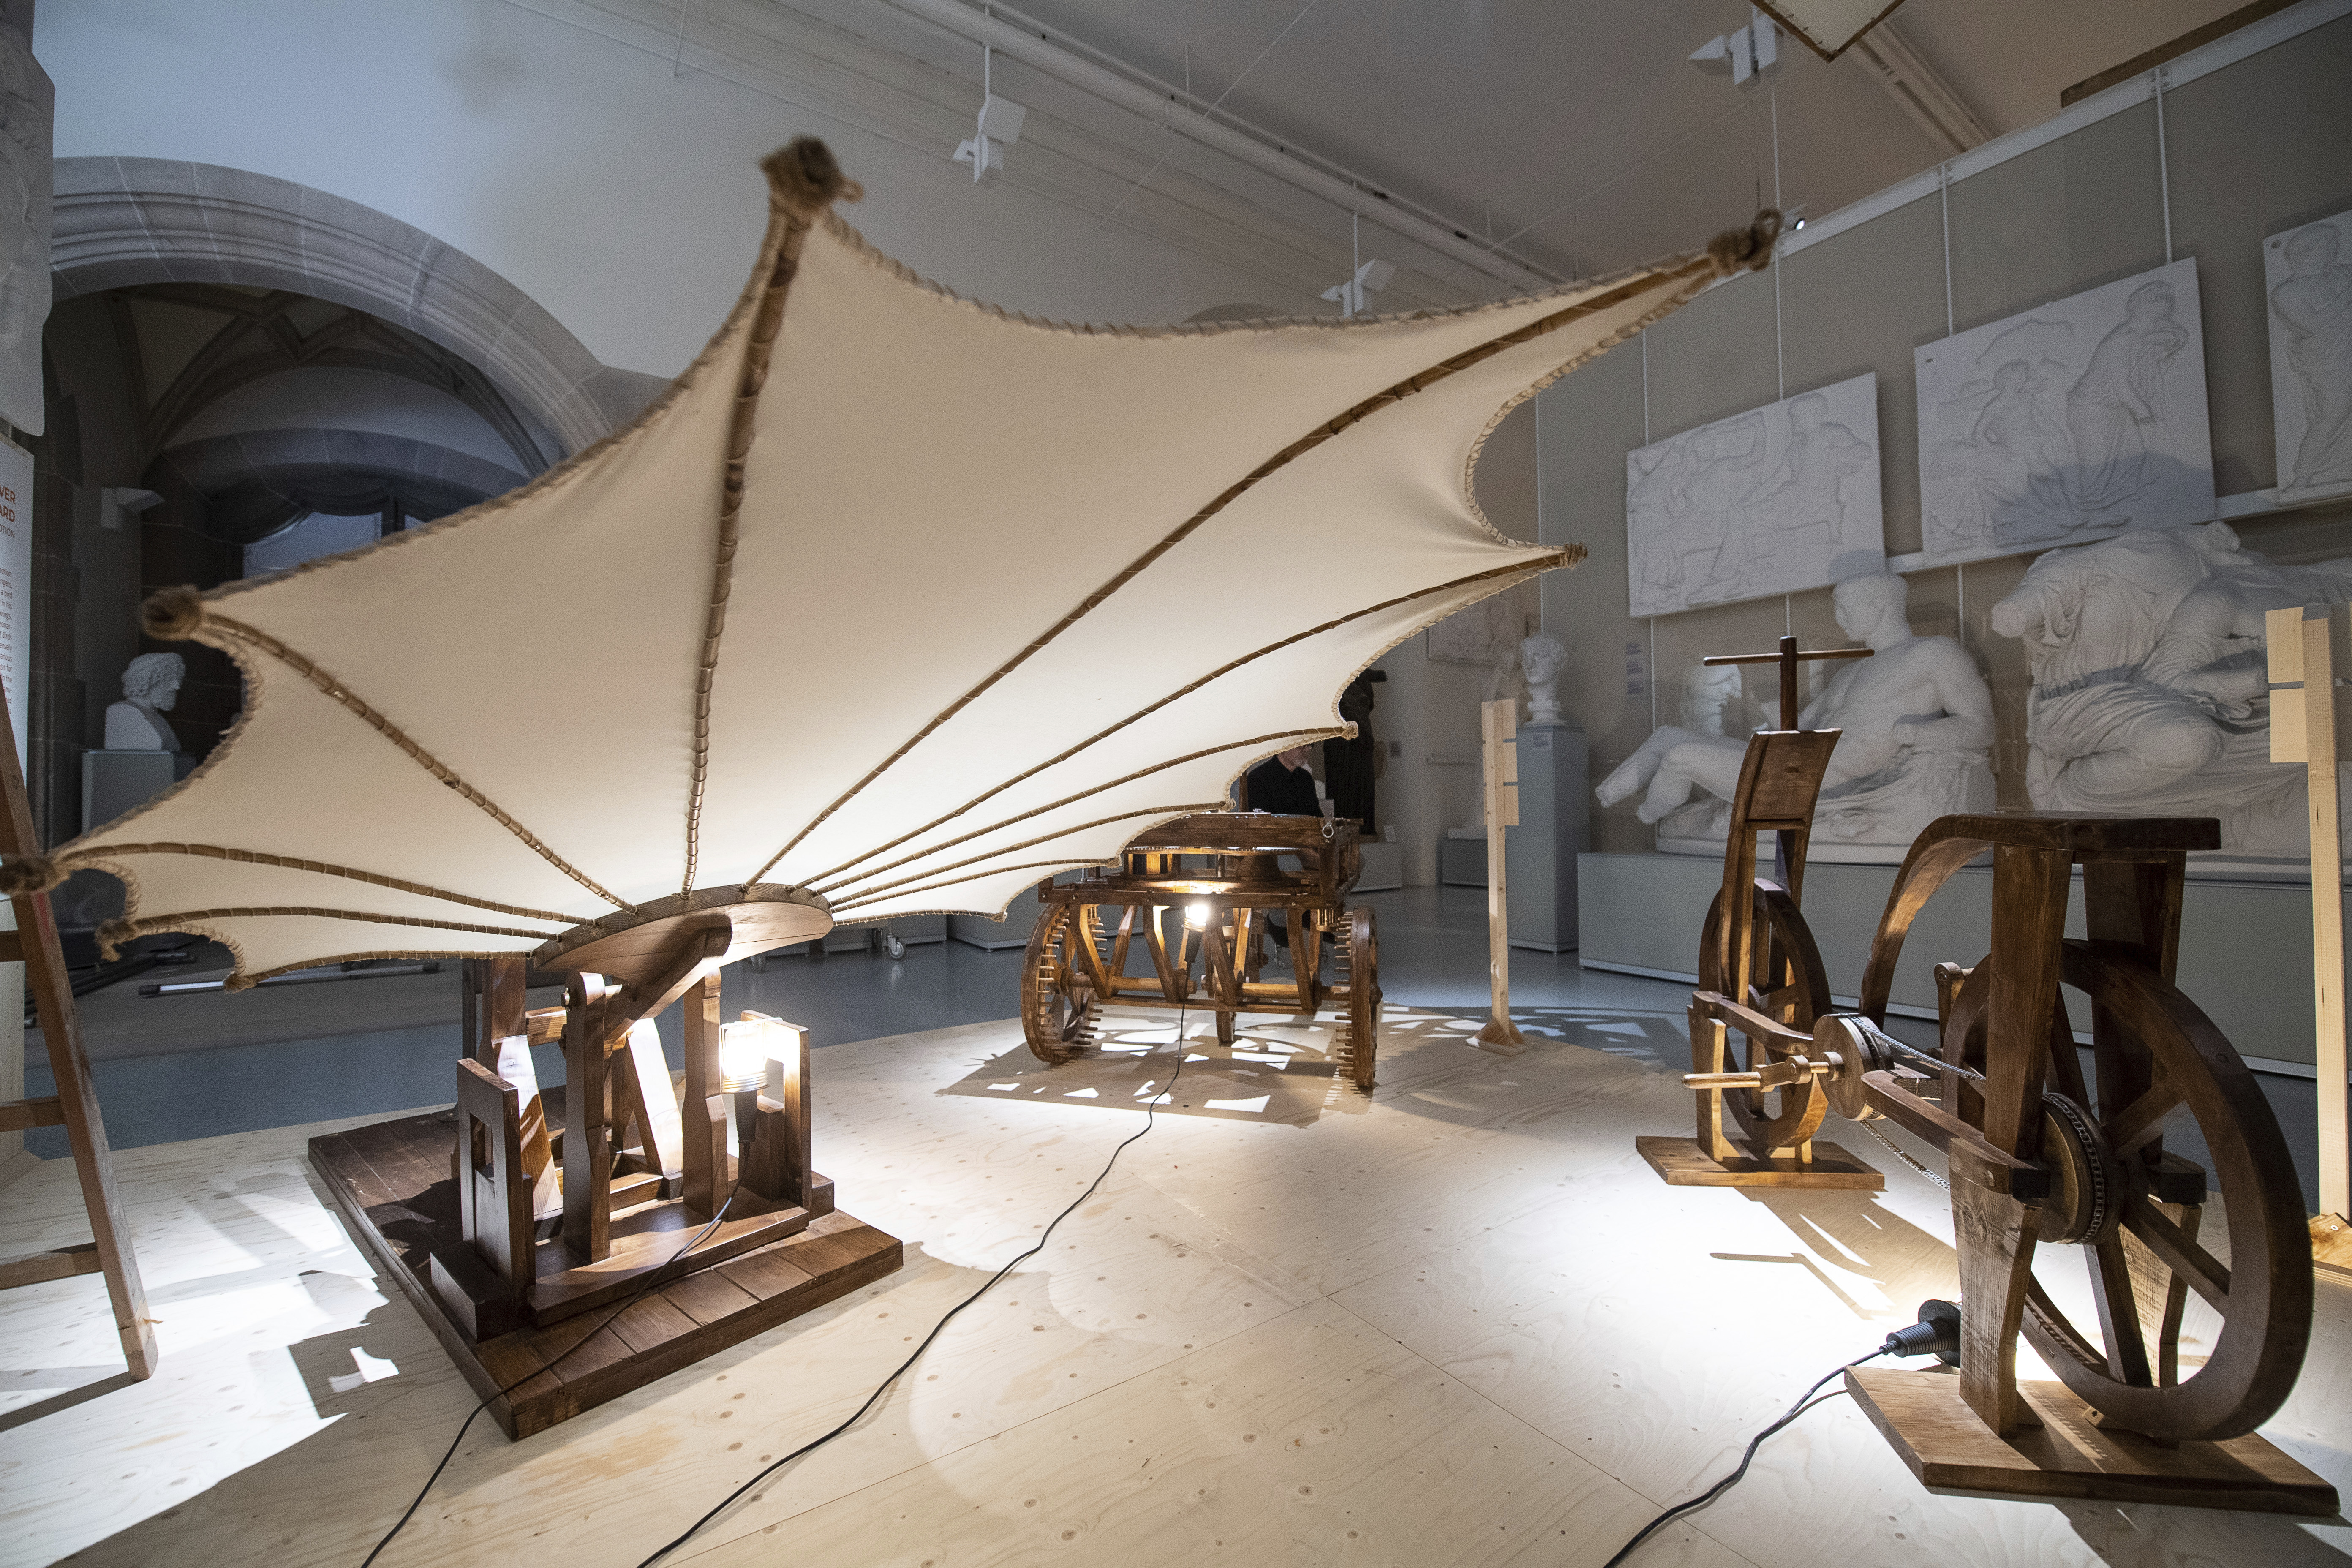 29 April 2019, Baden-Wuerttemberg, T'bingen: Replicas of da Vinci's machines are on display during a press tour of the exhibition 